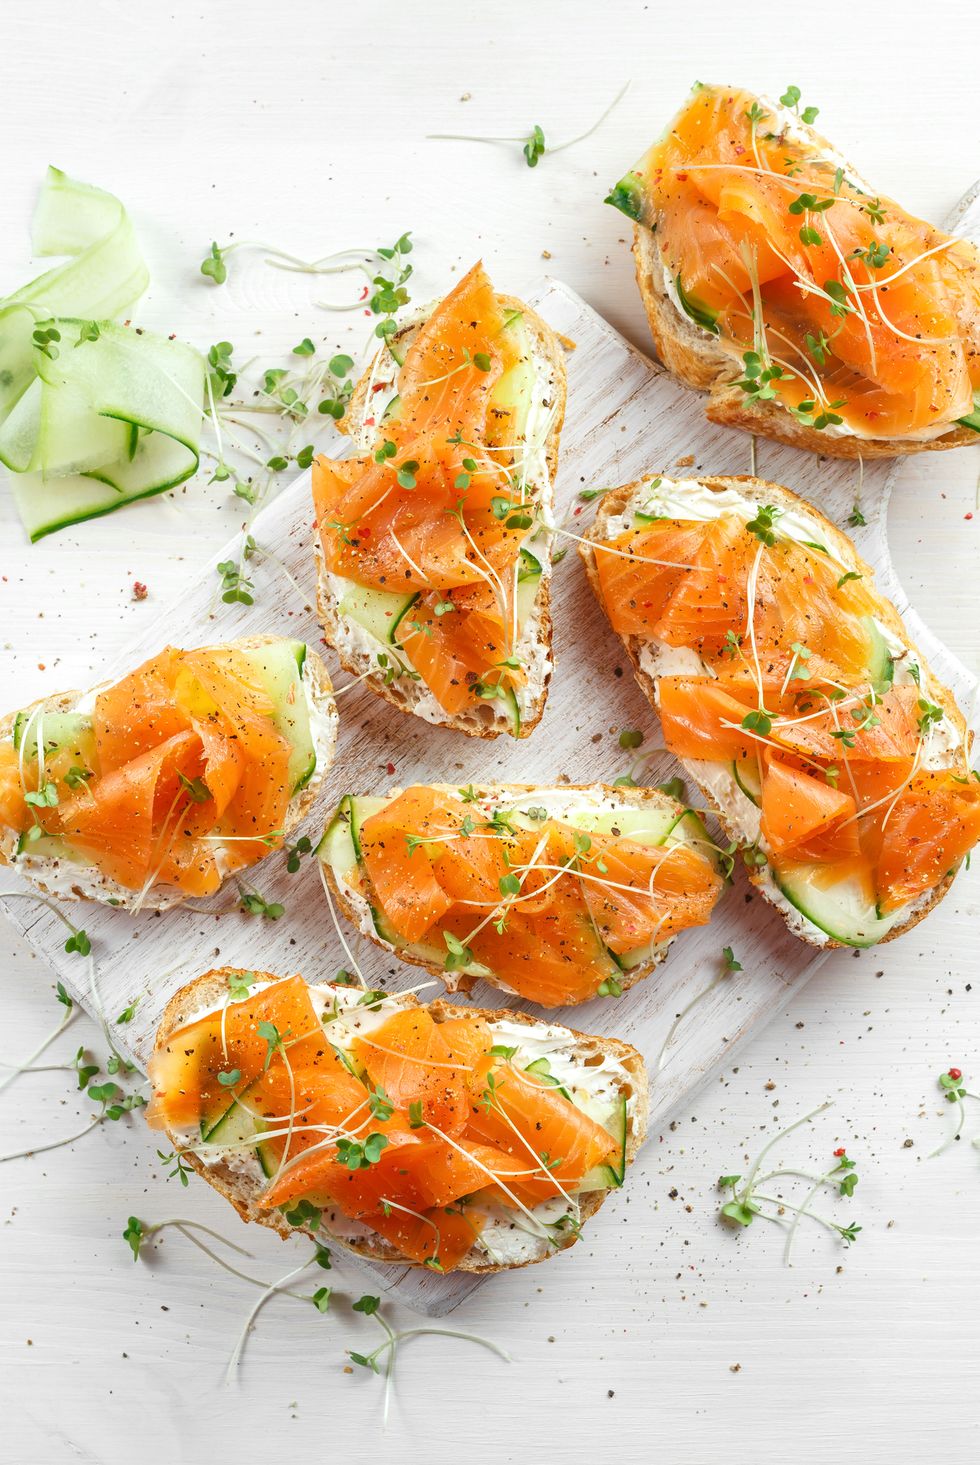 Smoked salmon bruschettas with soft cheese and cucumber shavings on white board.